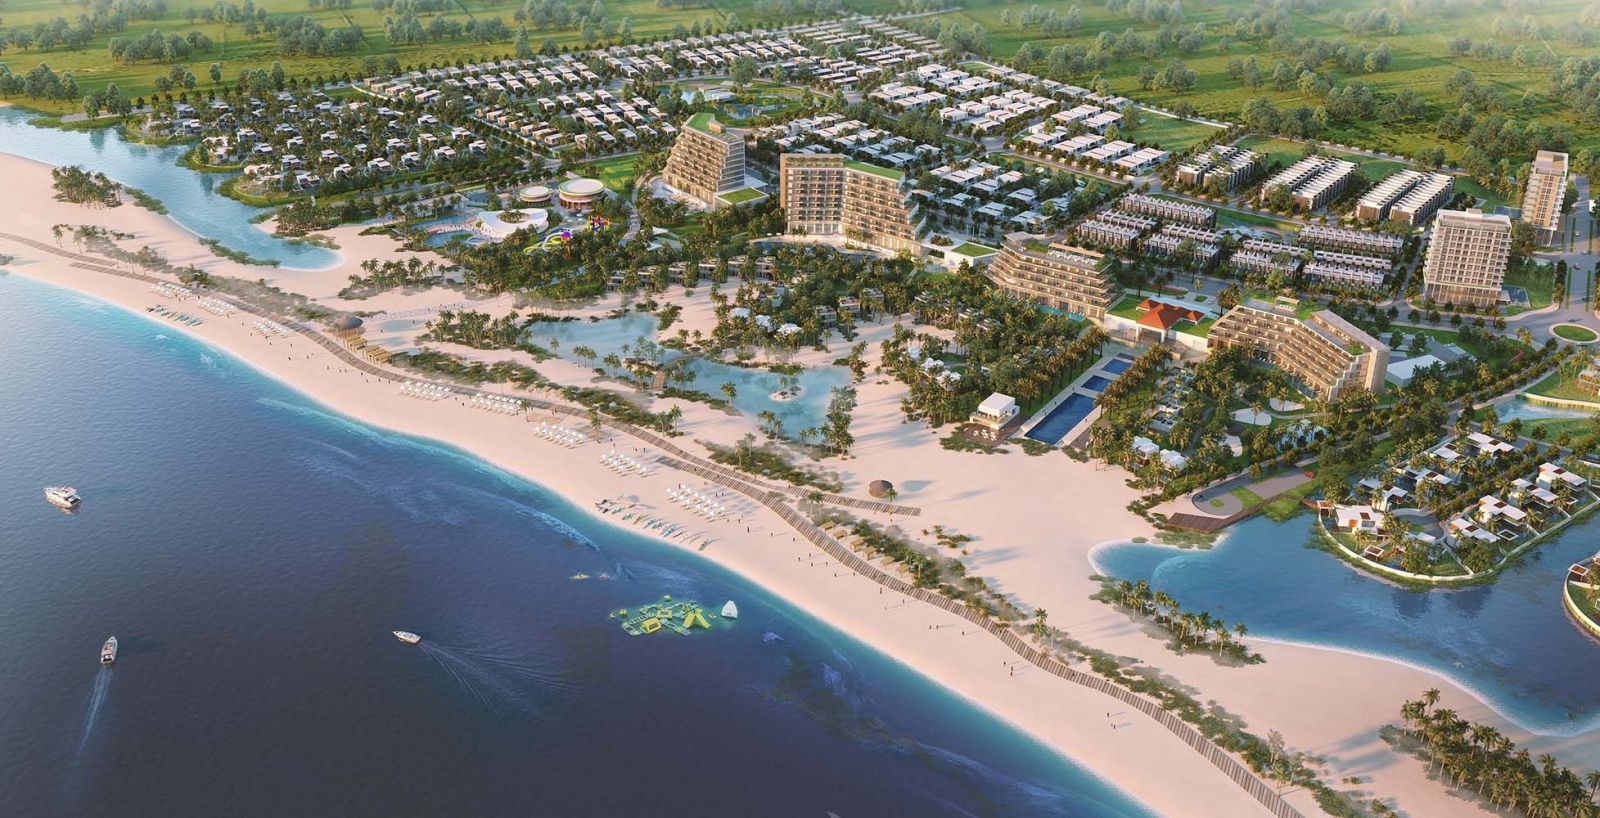 The artist impression of Lac Viet Tourist City in Binh Thuan province.